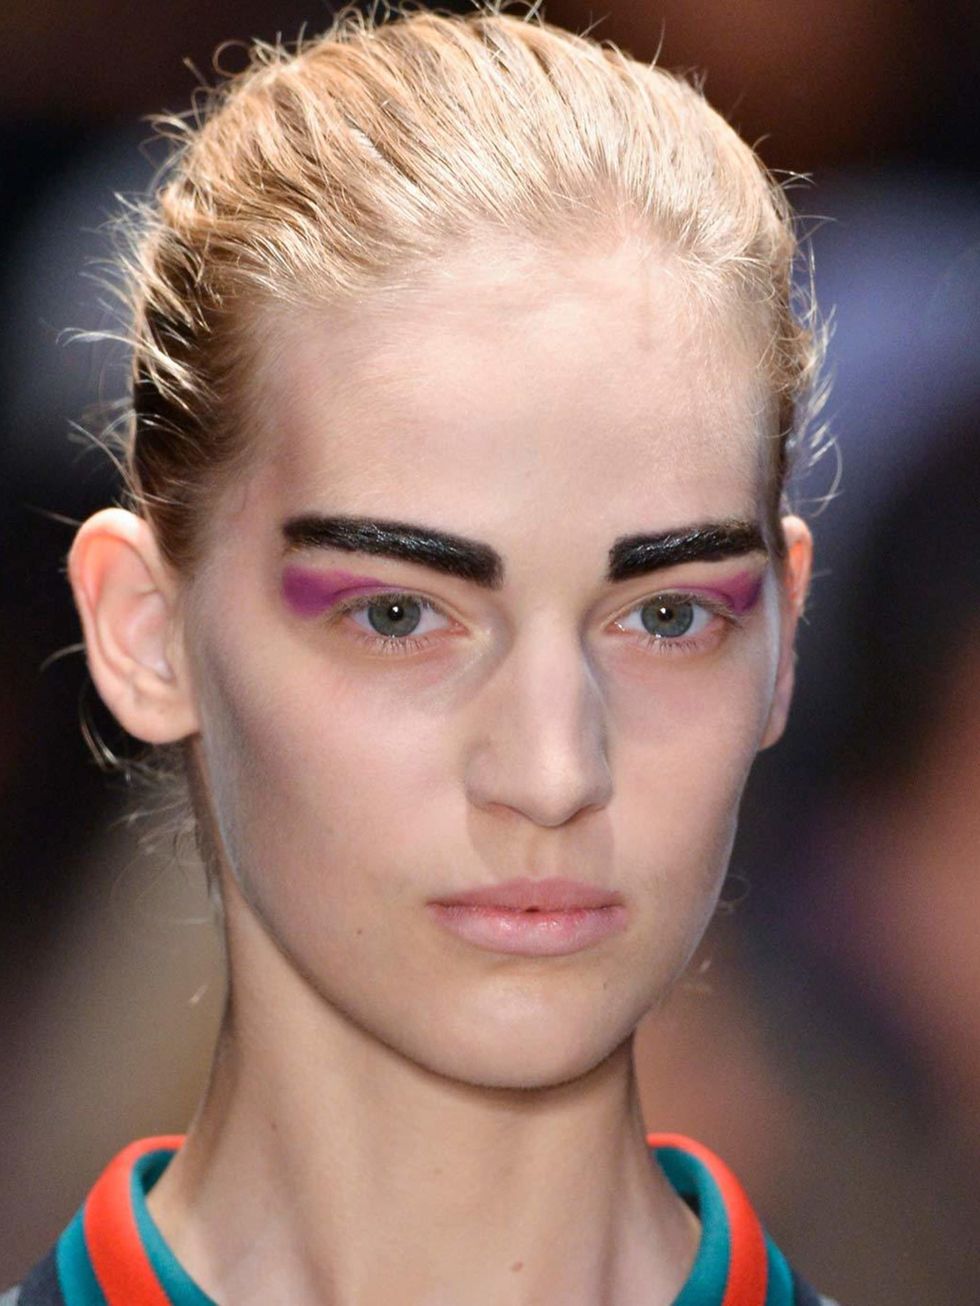 <p>Totally scrubbed, barely-there skin allows these boyish <a href="http://www.elleuk.com/beauty/make-up-skin/make-up-features/best-spring-summer-2014-beauty-paris-fashion-week">brows</a> to do the talking. Yes they may be totally exaggerated and OTT but 